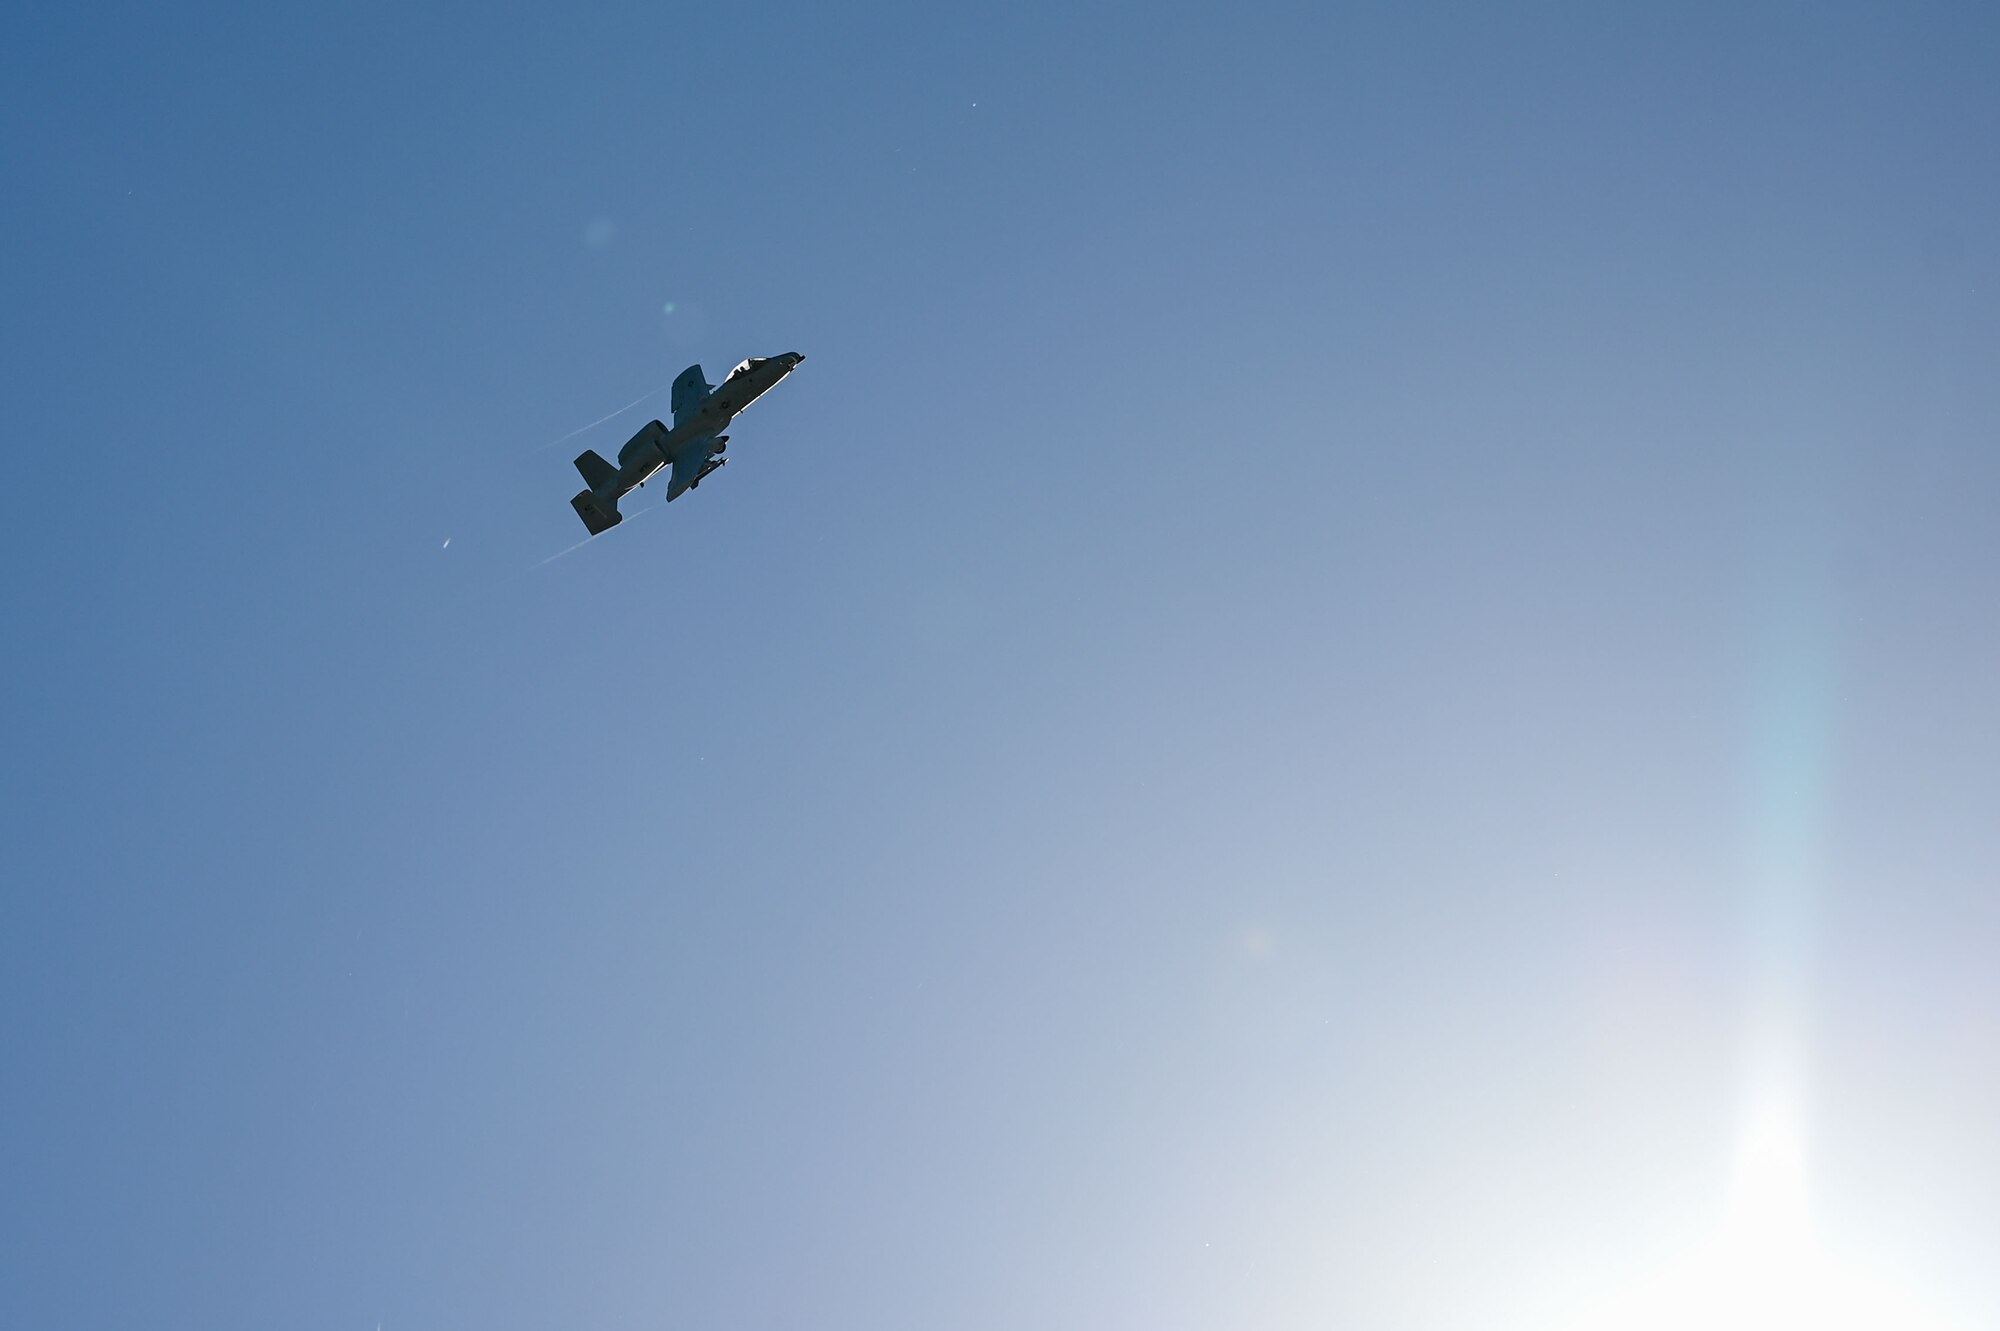 An A-10 Thunderbolt II attack aircraft flies over the sun in a blue sky. Faint vapor trails can be seen coming from its wingtips.